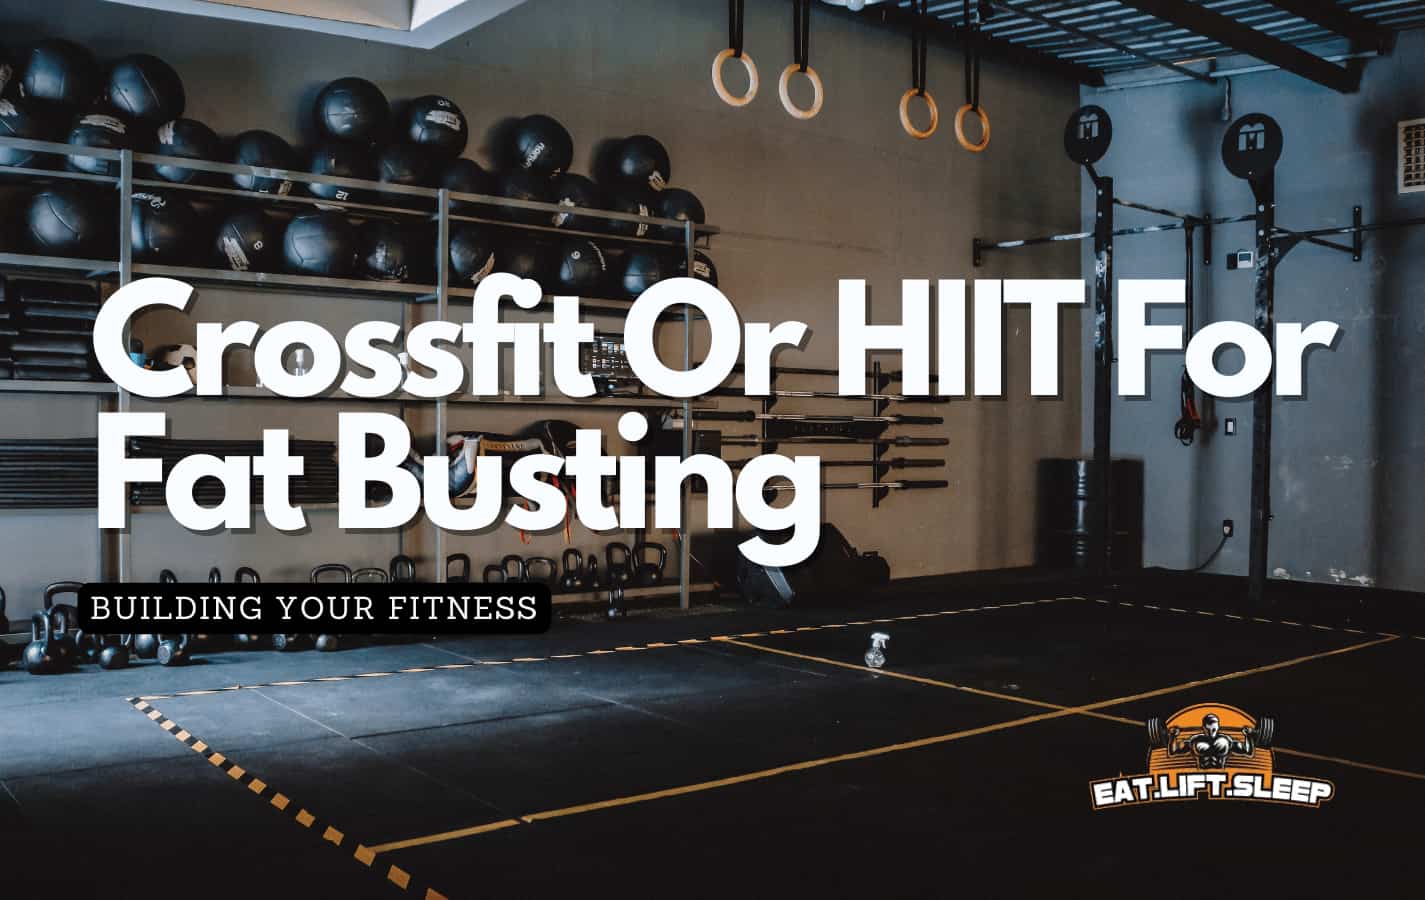 The wall of a Crossfit gym is full of all the equipment you could need for fat busting workouts